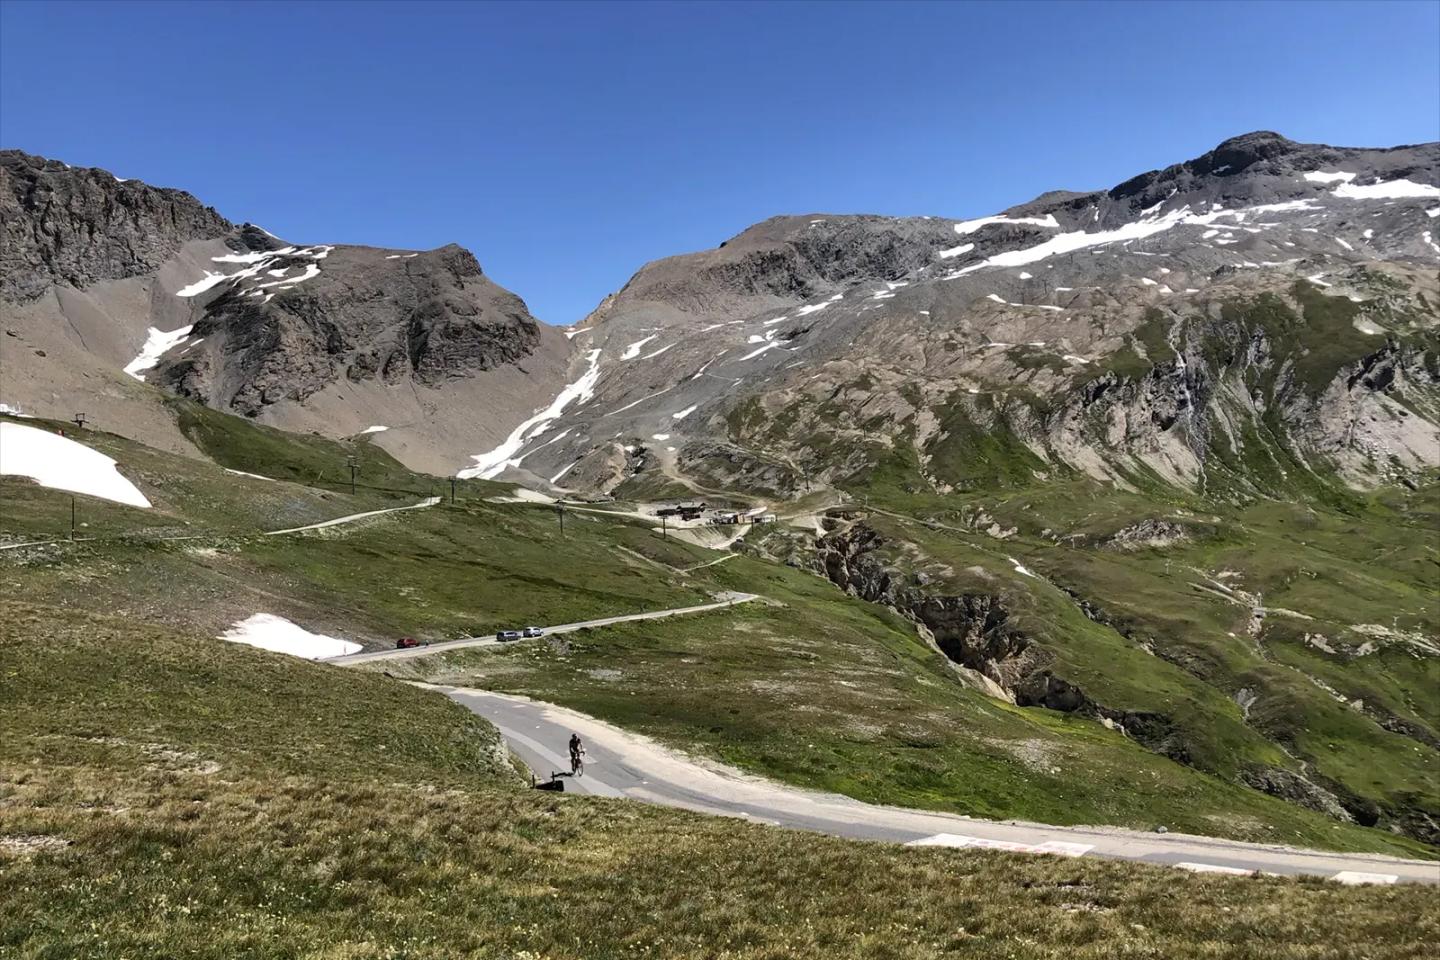 A winding road through the Col de l'Iseran with rugged mountains and patches of snow, under a clear blue sky.